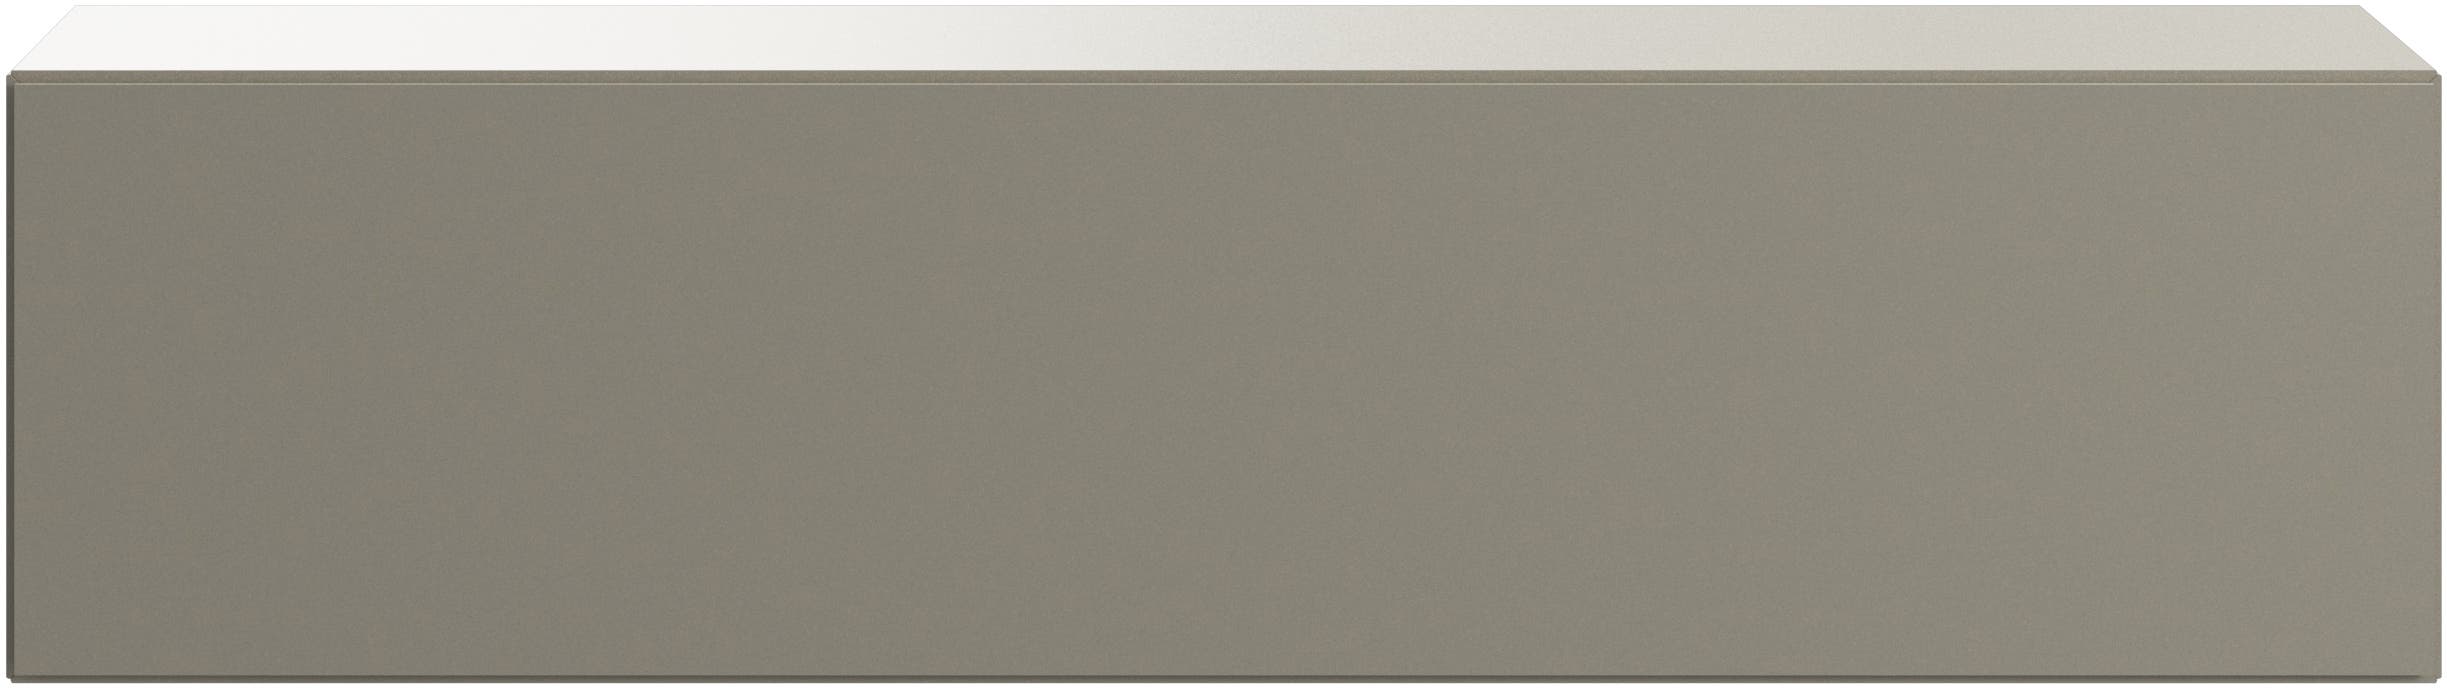 Lugano wall mounted cabinet with drop down door